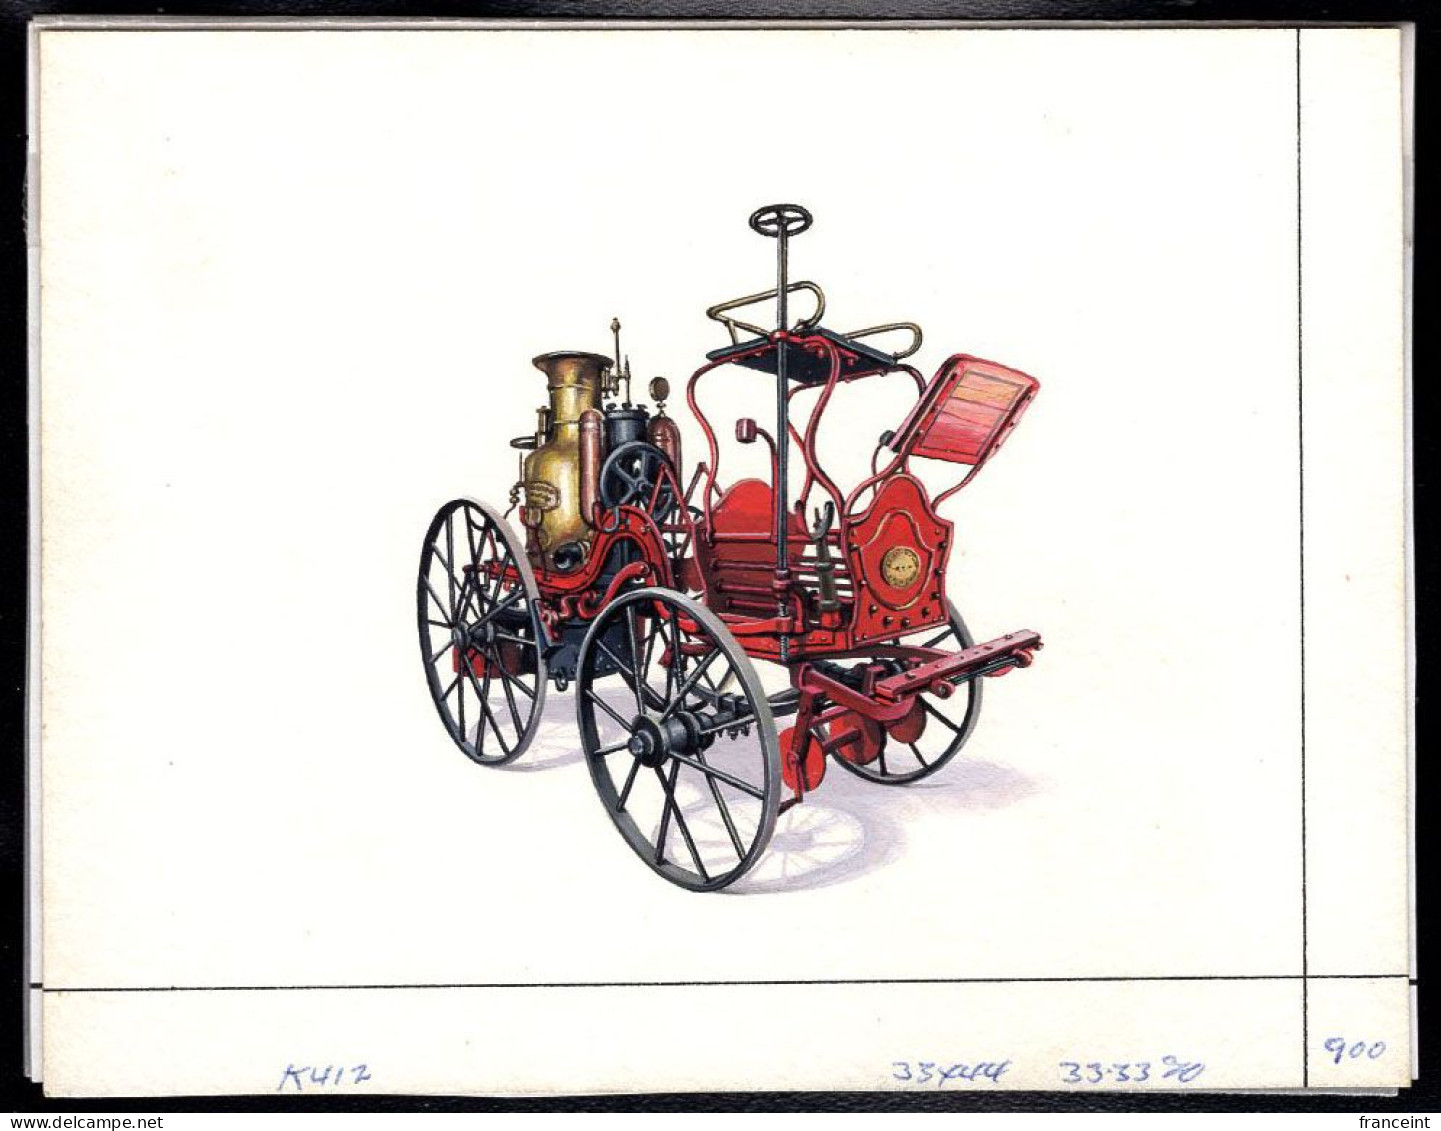 CAMBODIA(1997) "Merry Weather" Fire Truck 1894. Original Artwork, Watercolor On Posterboard Measuring 16 X 12.5 Cm, With - Cambodge